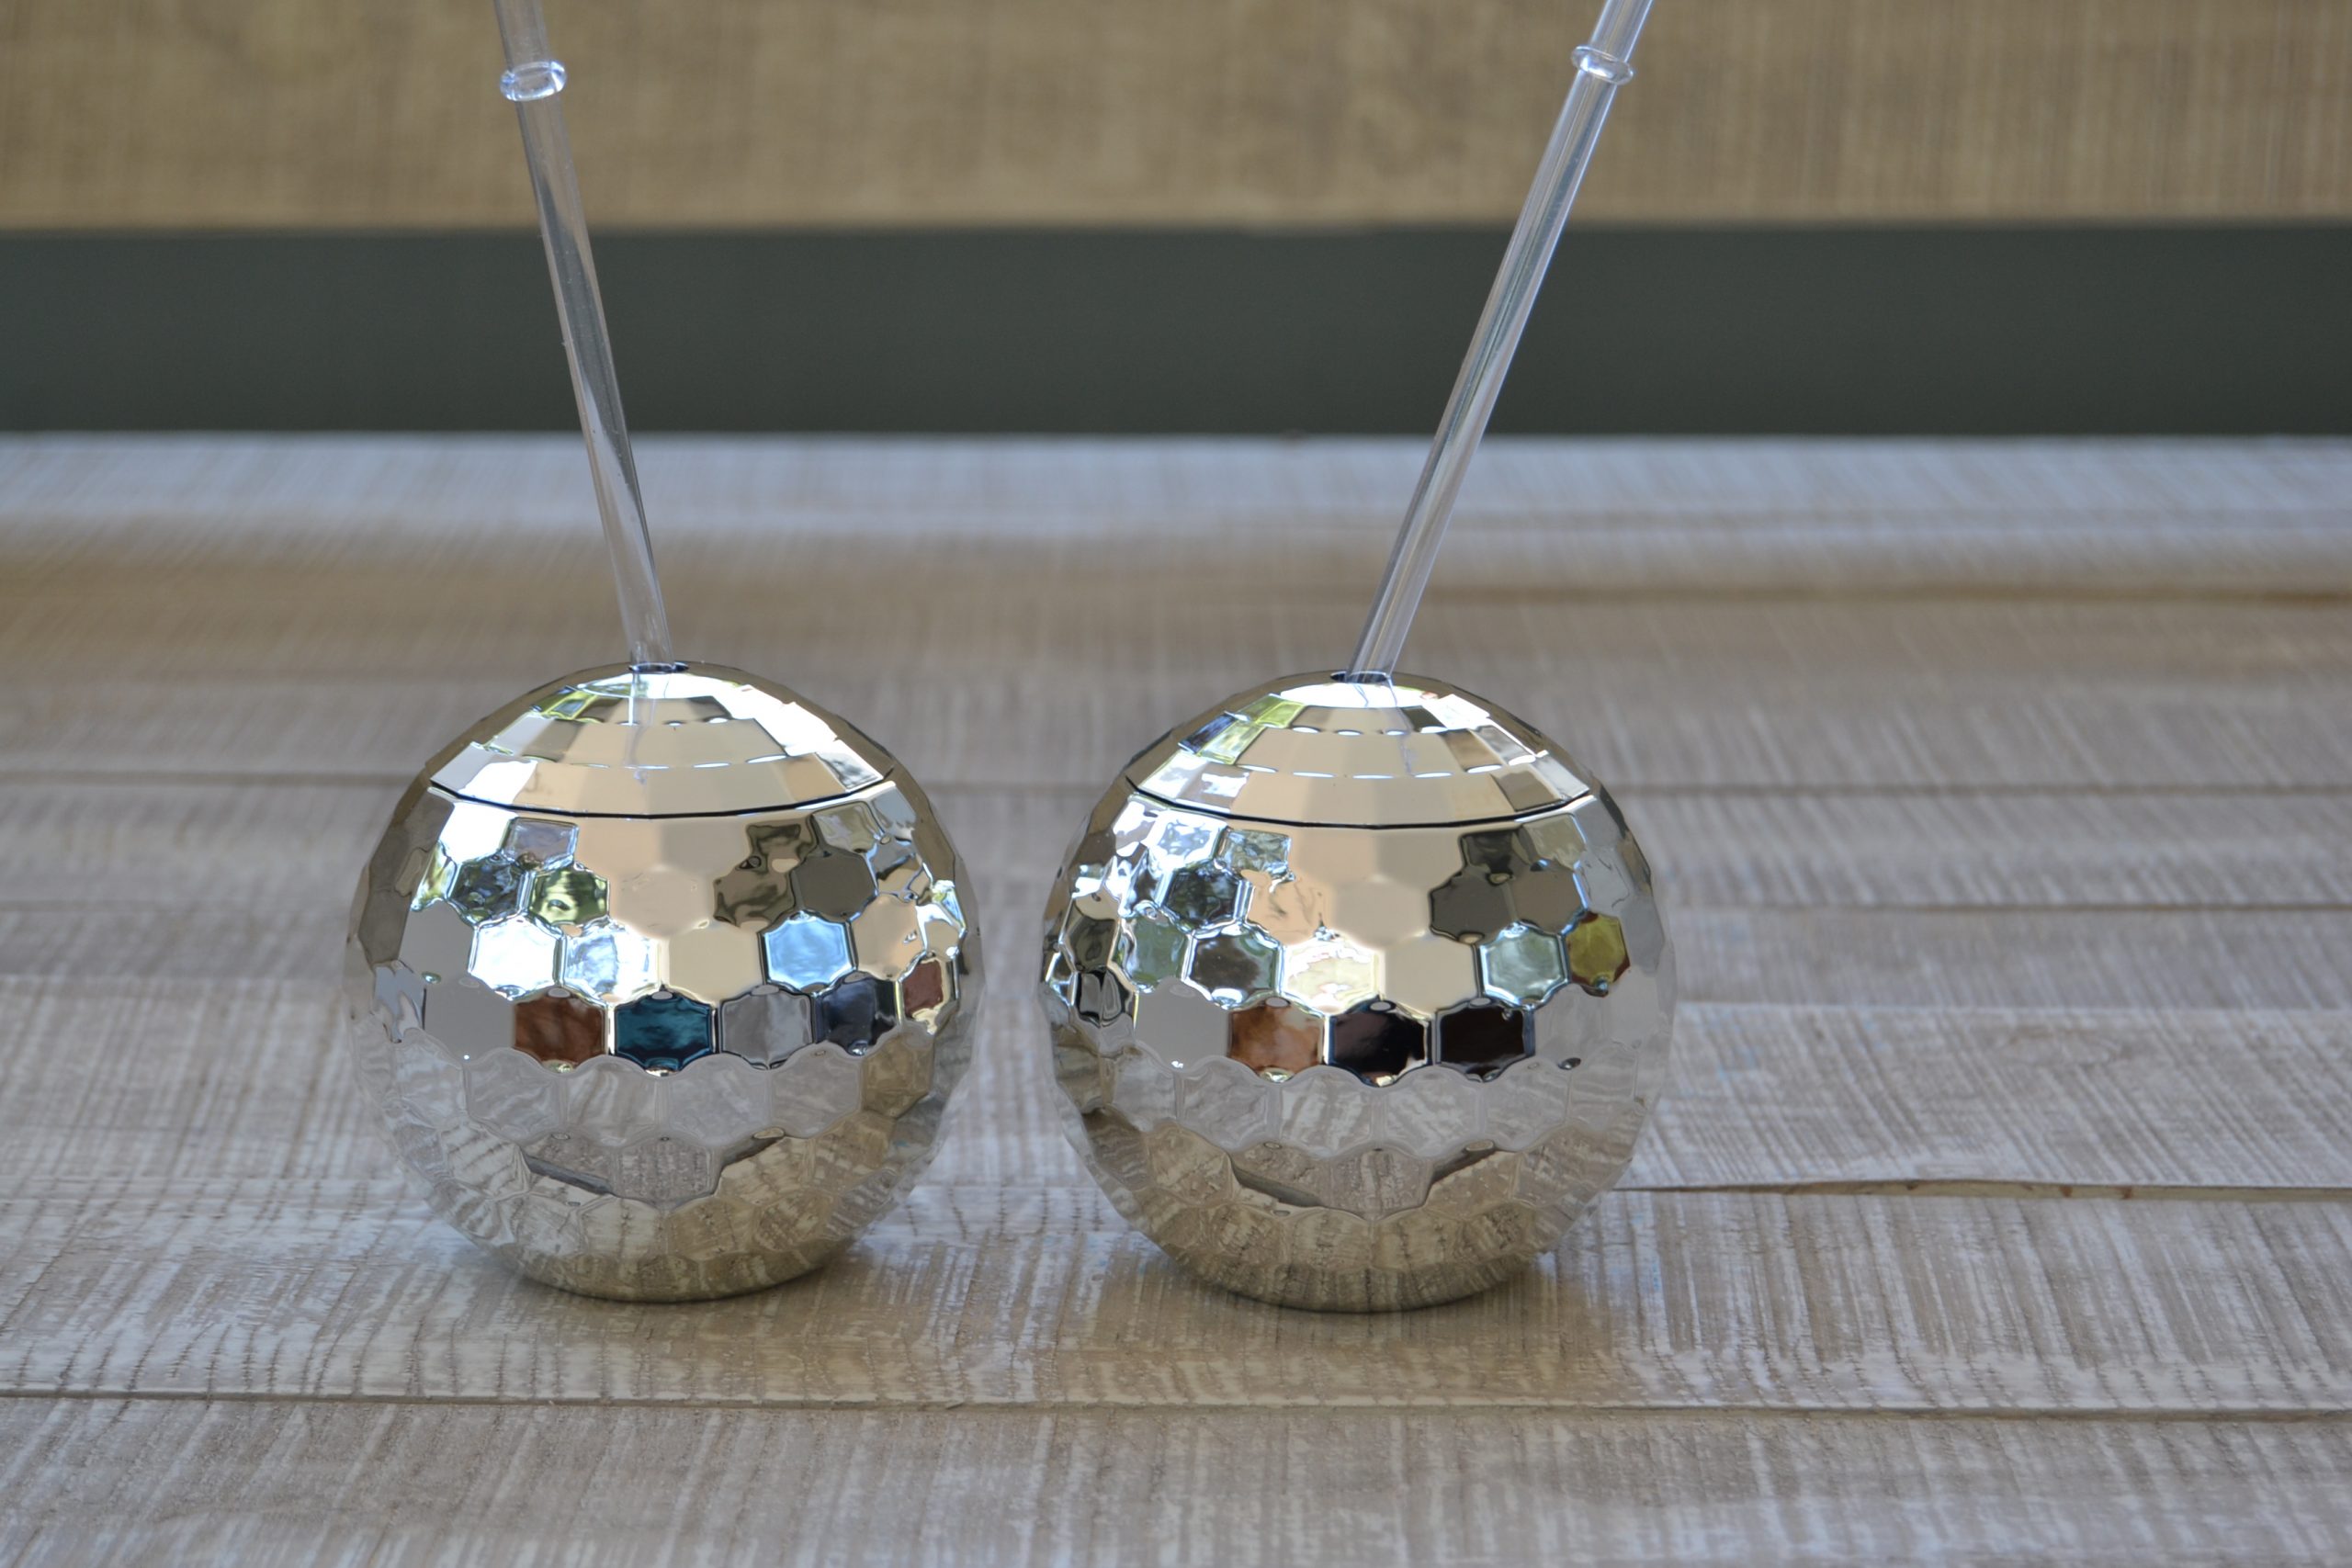 disco ball cup with straw, branded mugs